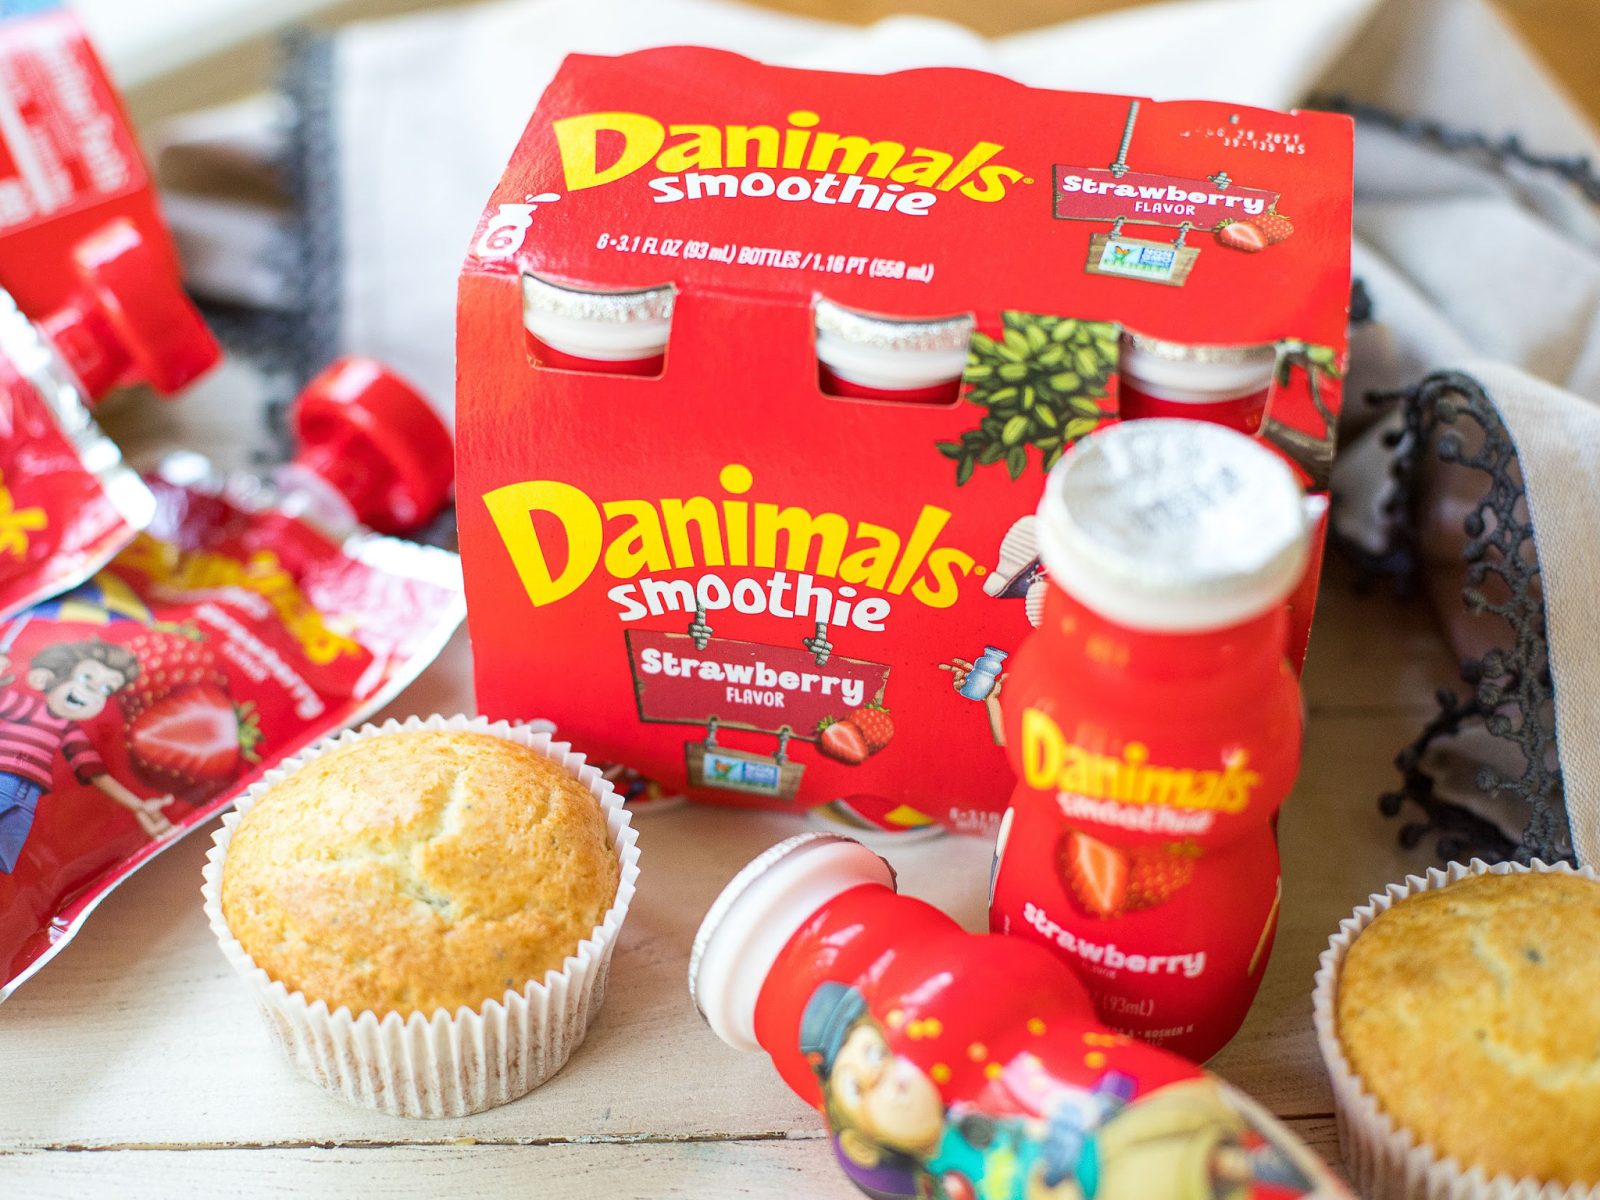 Dannon Danimals Smoothie 6-Pack As Low As $1.99 At Kroger